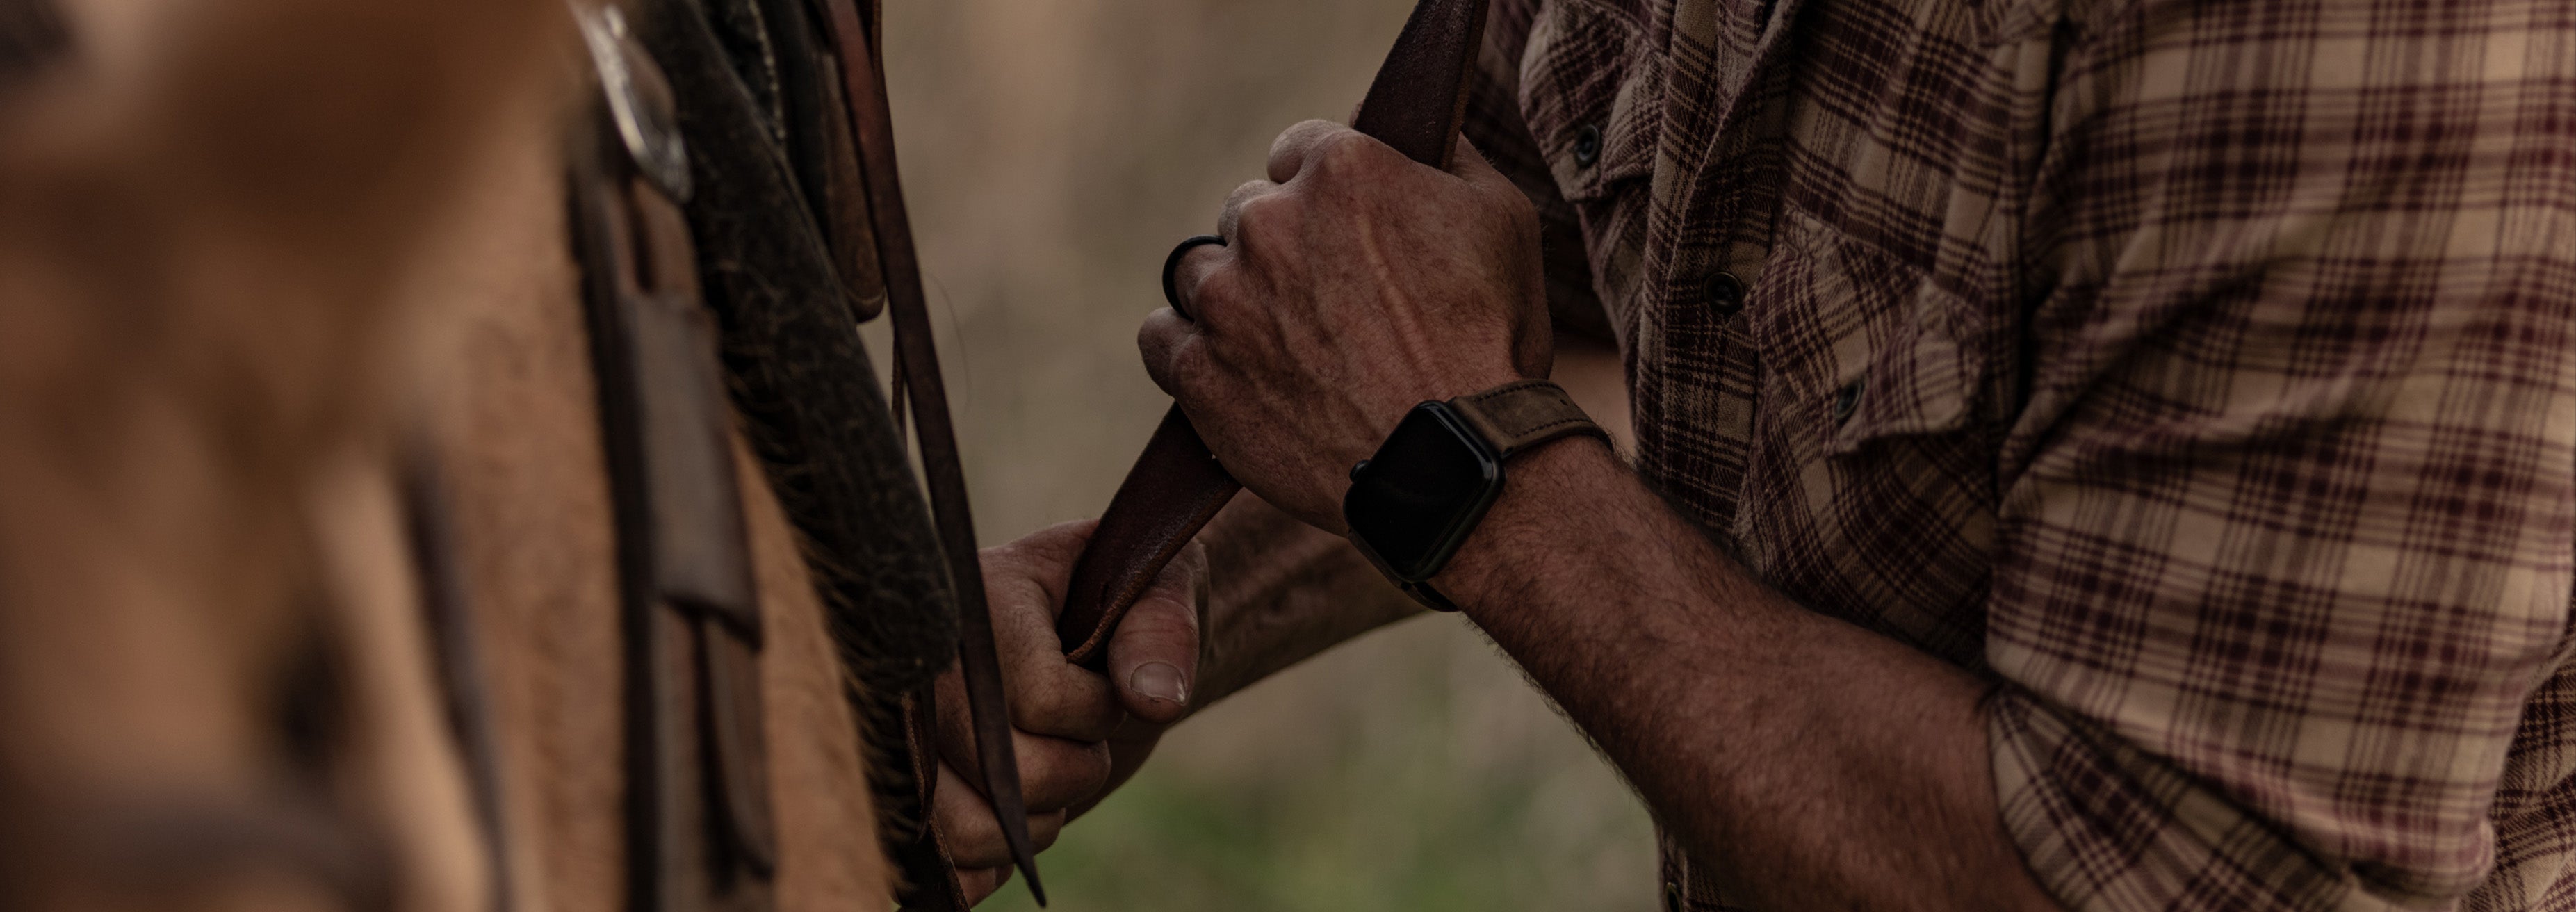 Vulcan Ascent - Brown Apple Leather Watch Band lifestyle image 3